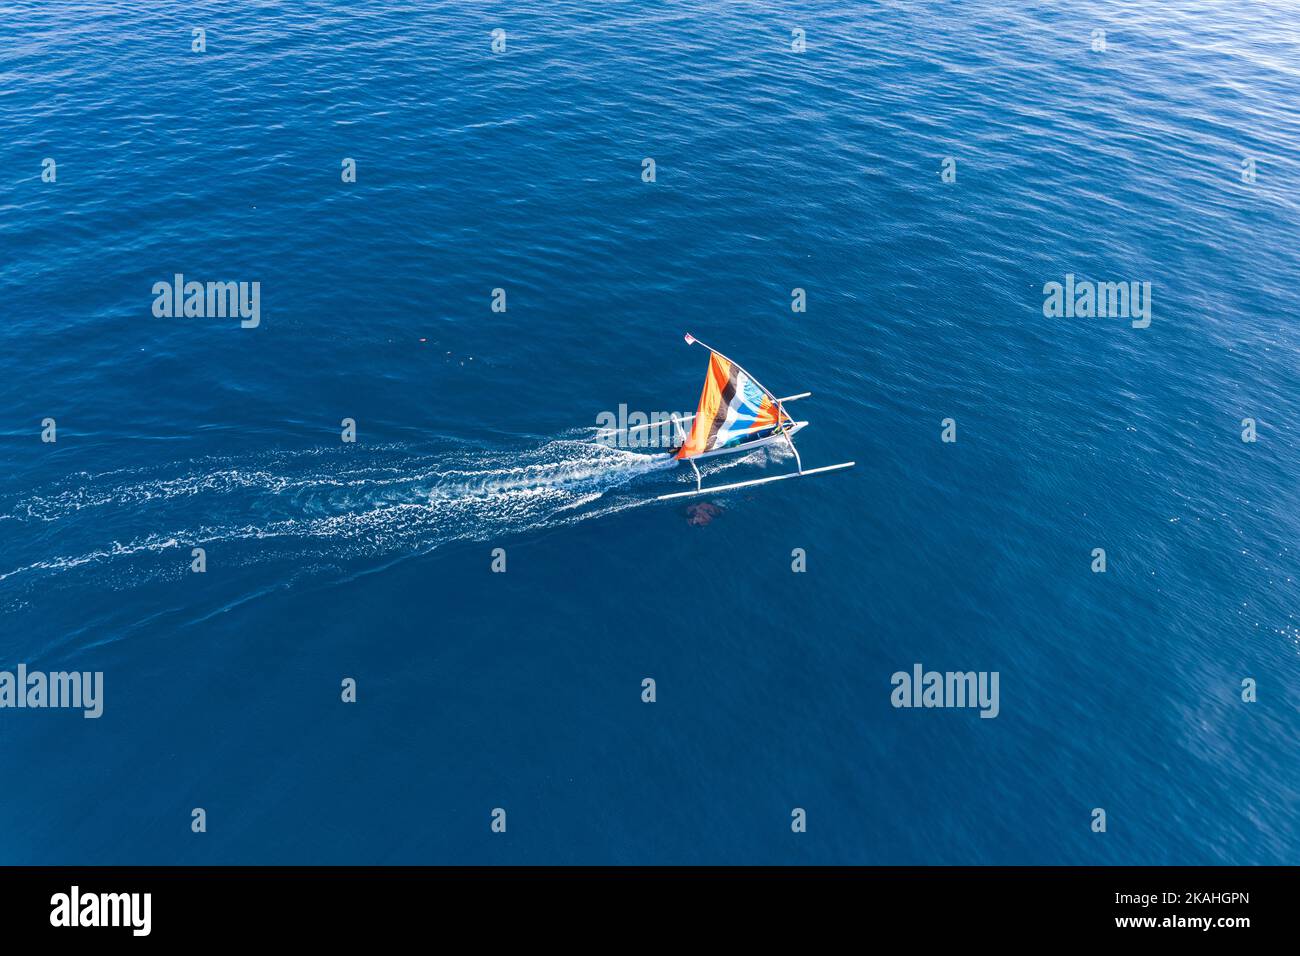 Aerial view of a traditional fishing boat sailing in ocean, Lombok, West Nusa Tenggara, Indonesia Stock Photo